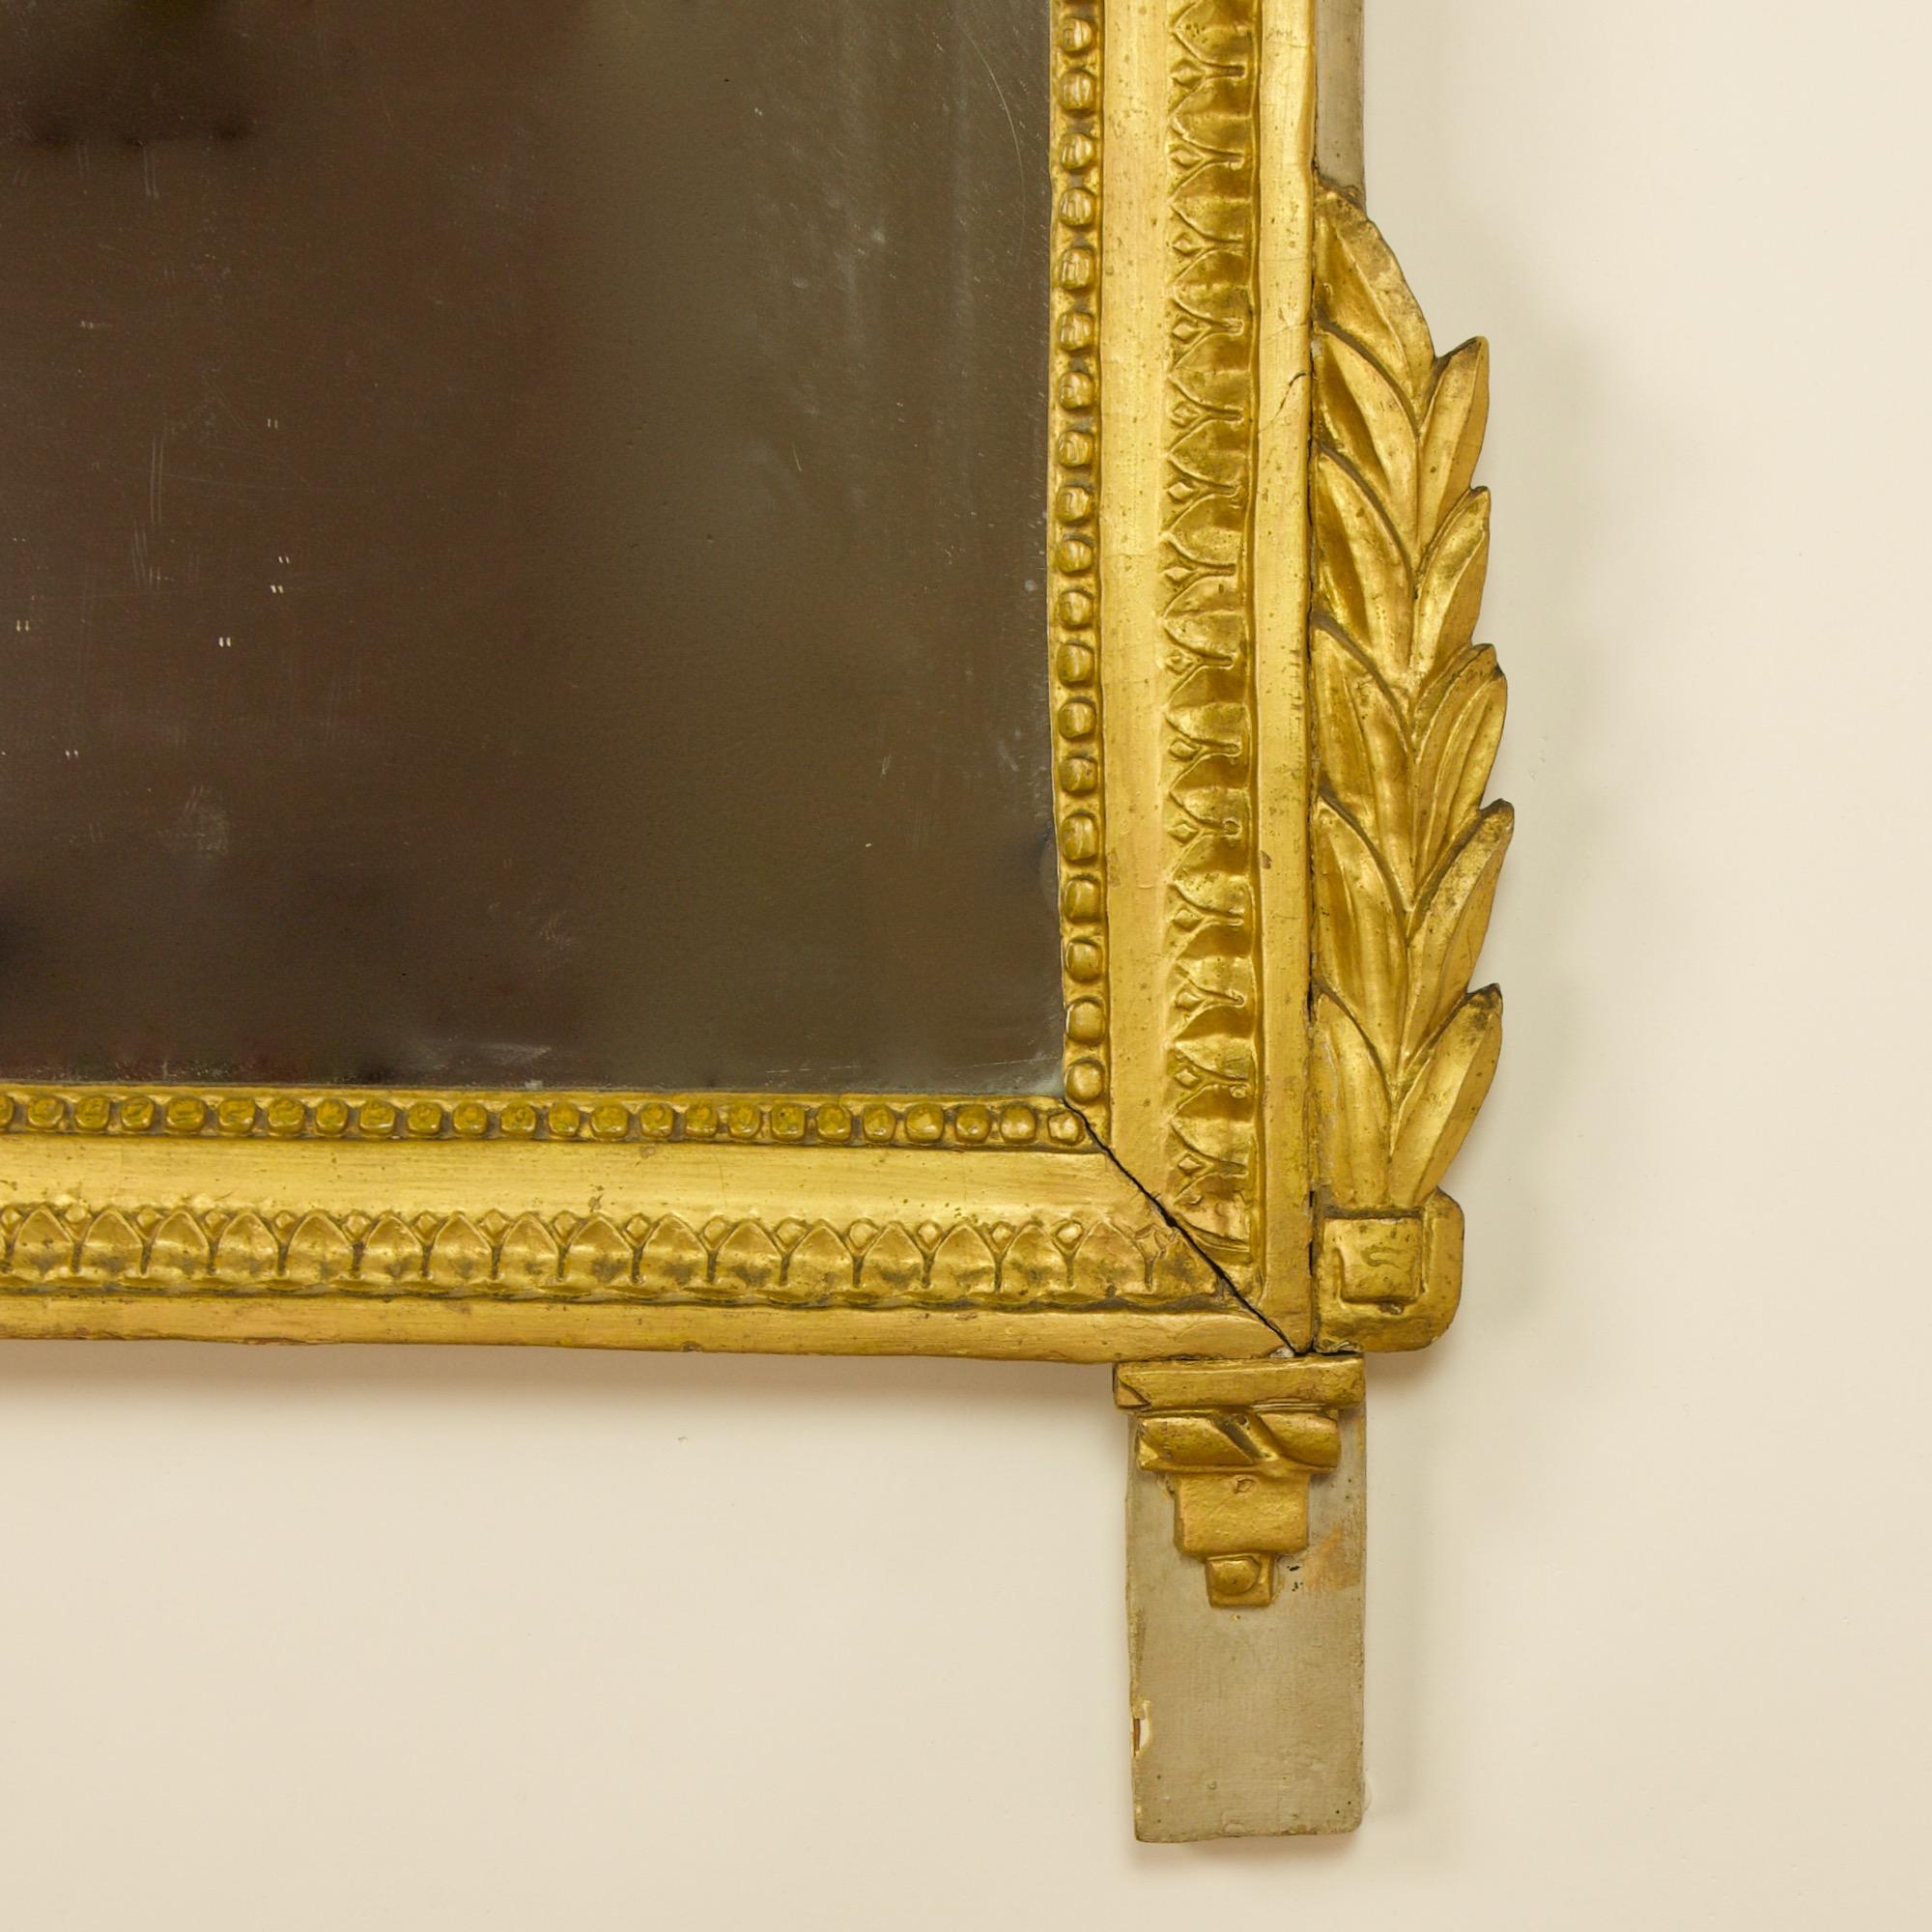 French 18th century Louis XVI giltwood wall mirror or trumeau

The giltwood mirror containing an old mirror plate within a moulded and beaded frame. The cresting showing a neoclassical floral vignette with two large foliage scrolls and leafs with